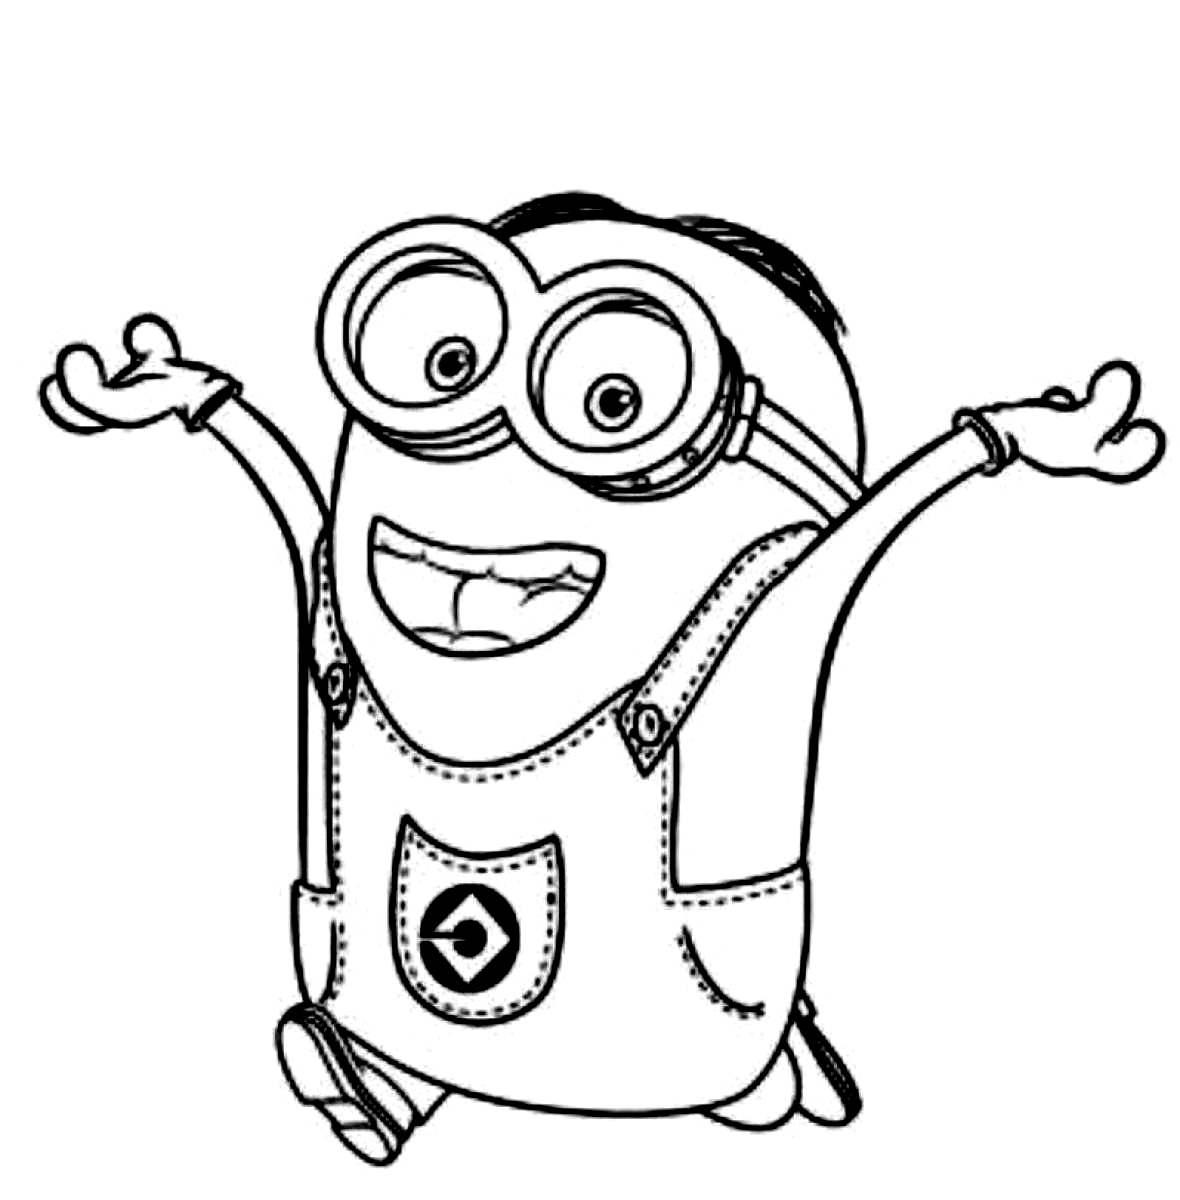 despicable me colouring pictures printable despicable me coloring pages for kids cool2bkids pictures despicable colouring me 